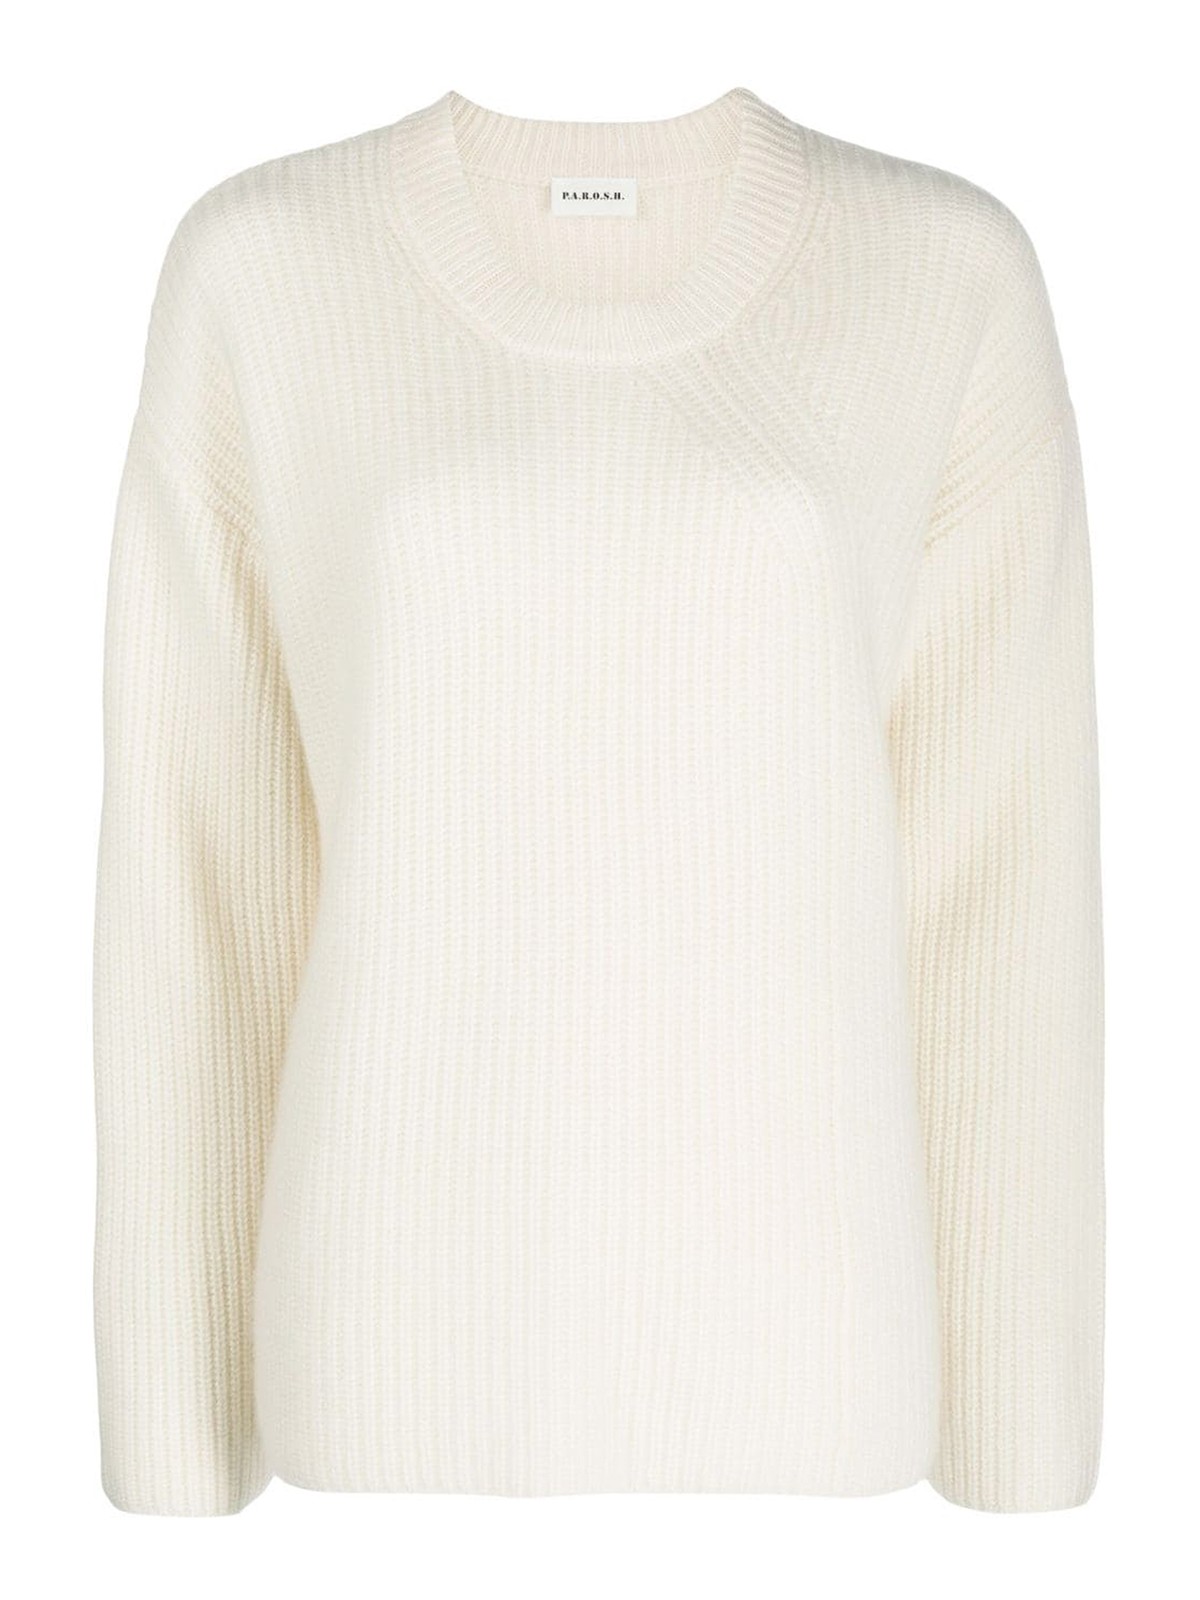 P.a.r.o.s.h. Boatneck In White